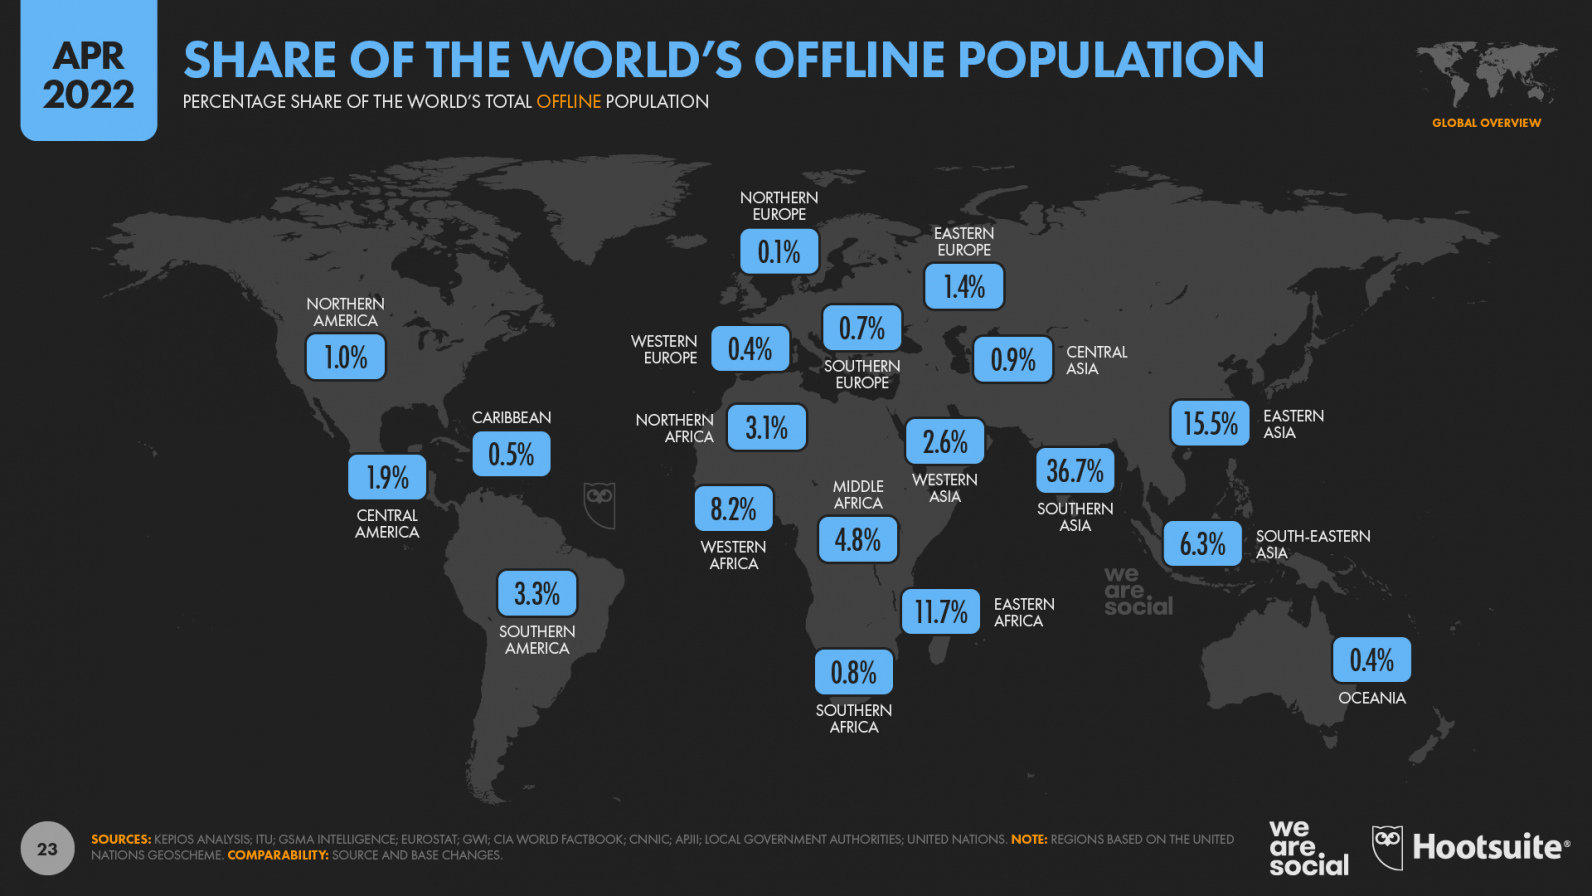 More than 5 billion people now use the